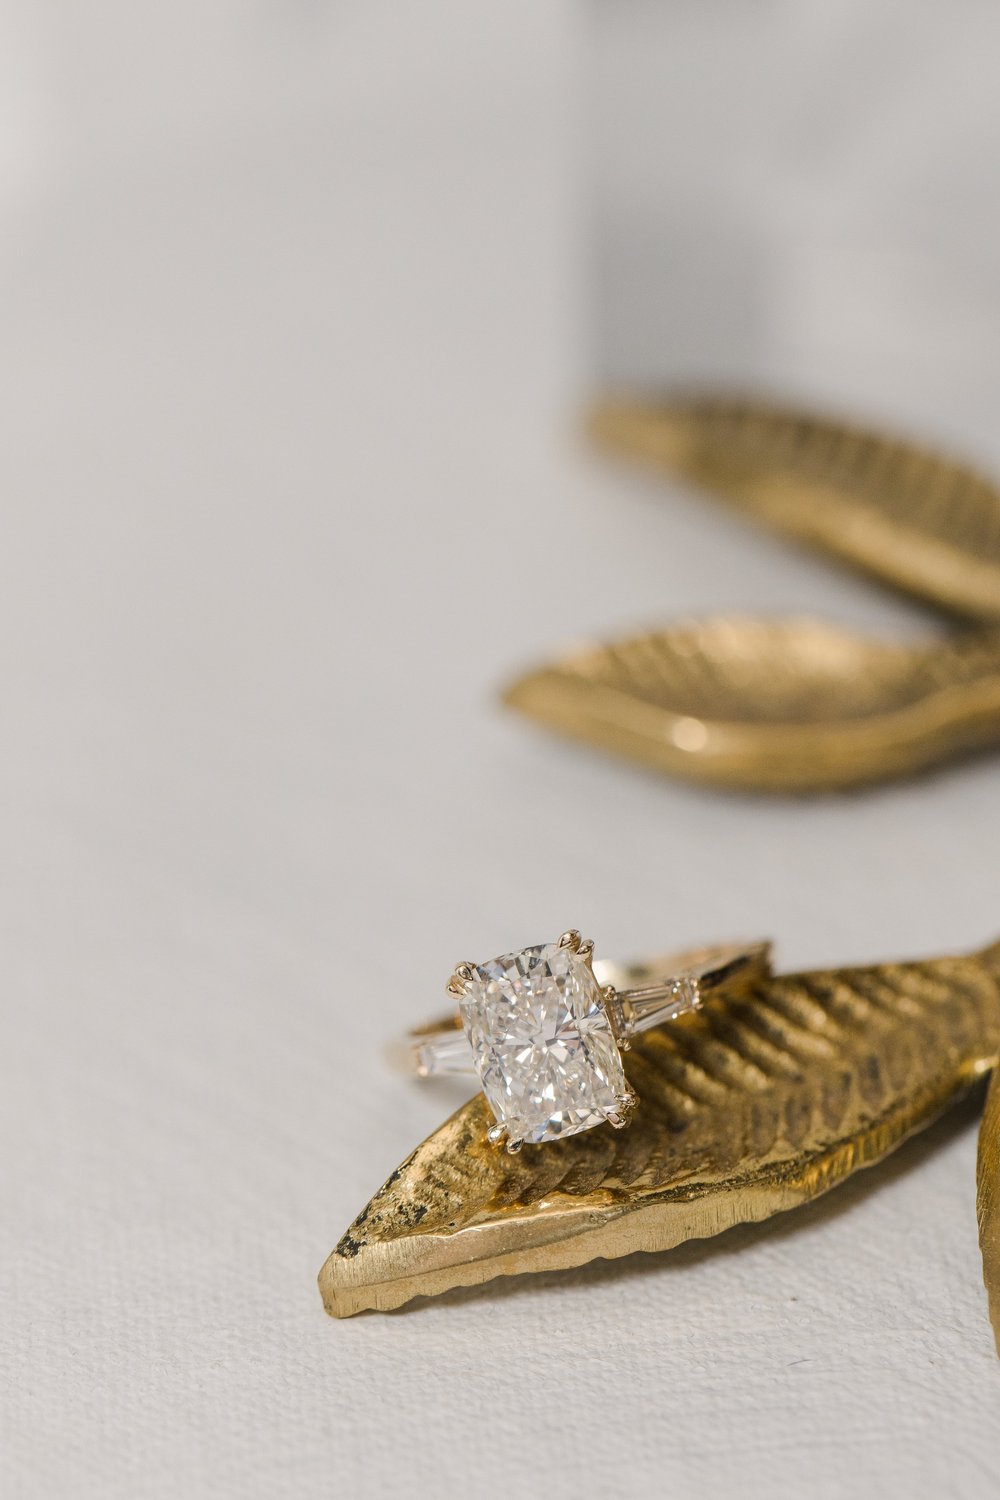 Custom designed radiant cut diamond engagement ring featuring accent baguette cut diamonds set in yellow gold made by Alexandria &amp; Company in Old Town Alexandria 